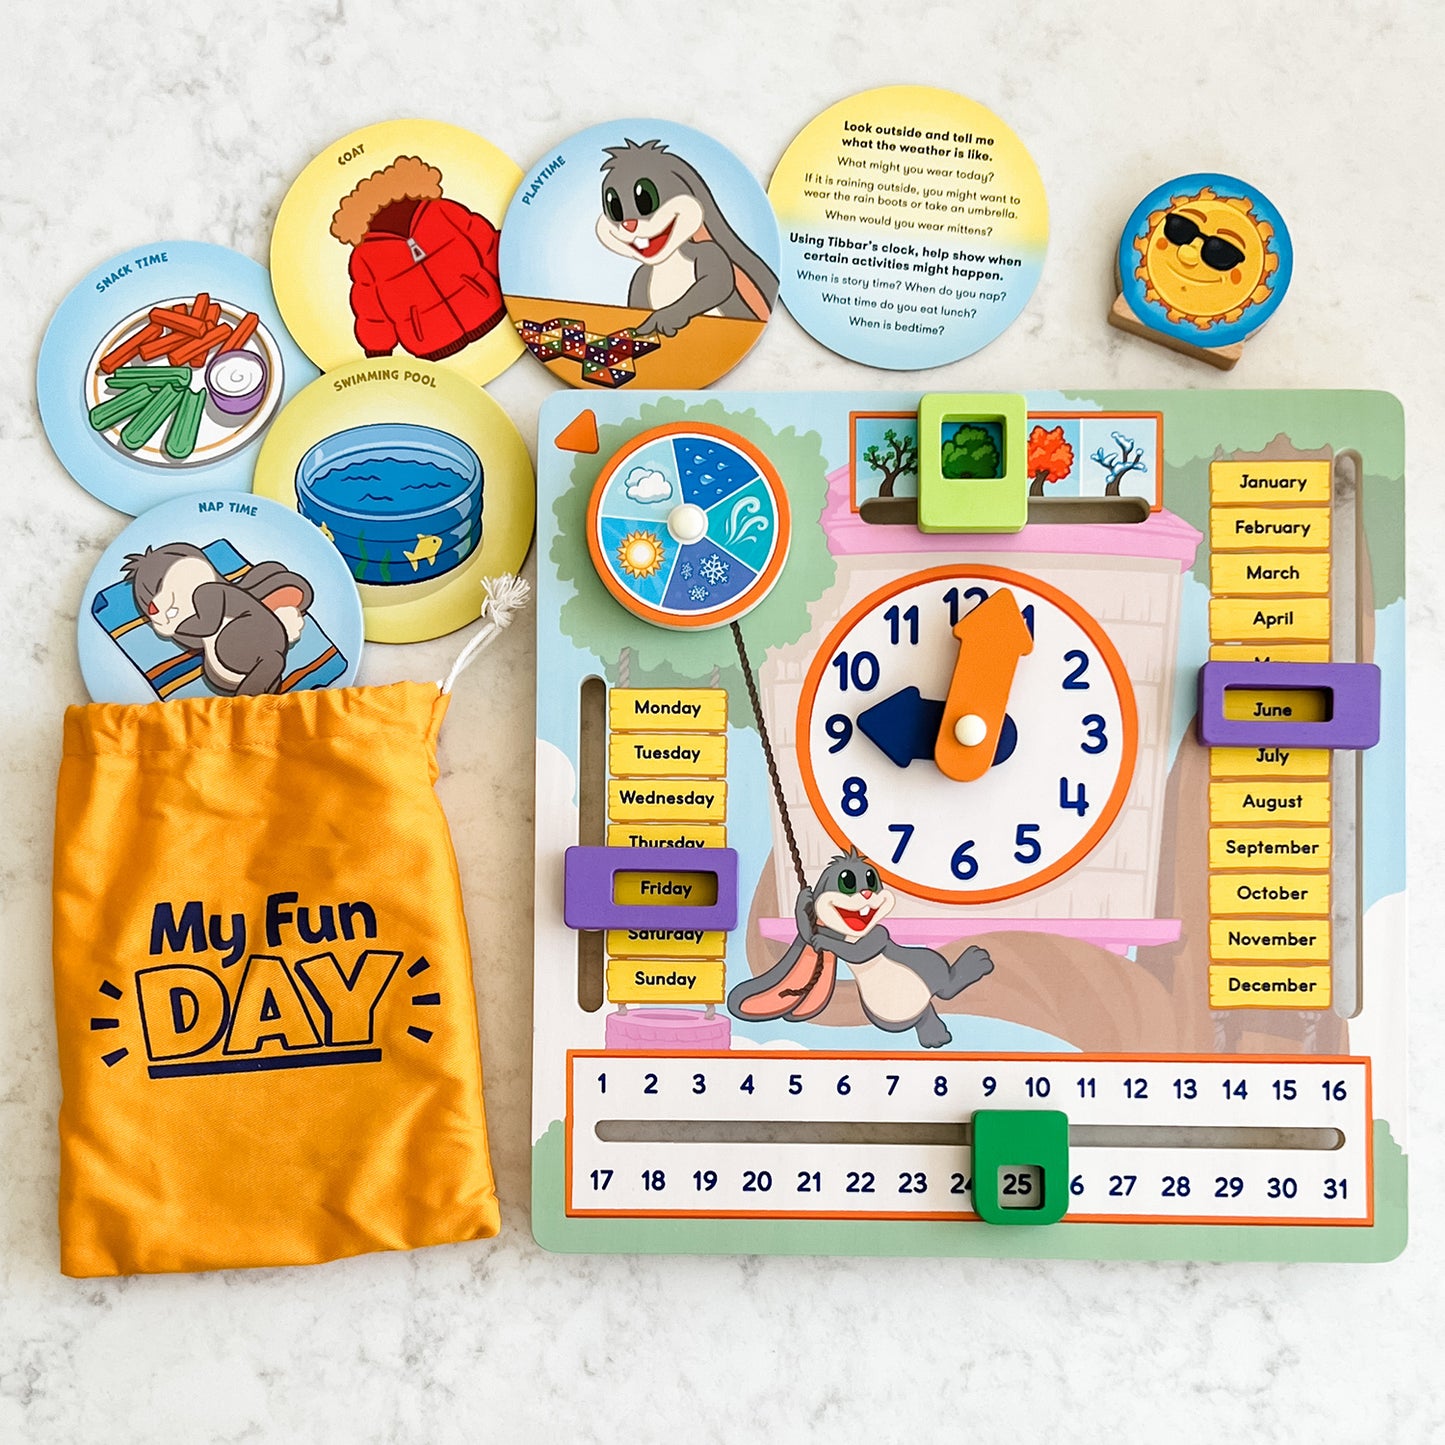 My Fun Day by SimplyFun is a wooden board designed to teach children about the weather, days of the week, months, and more.